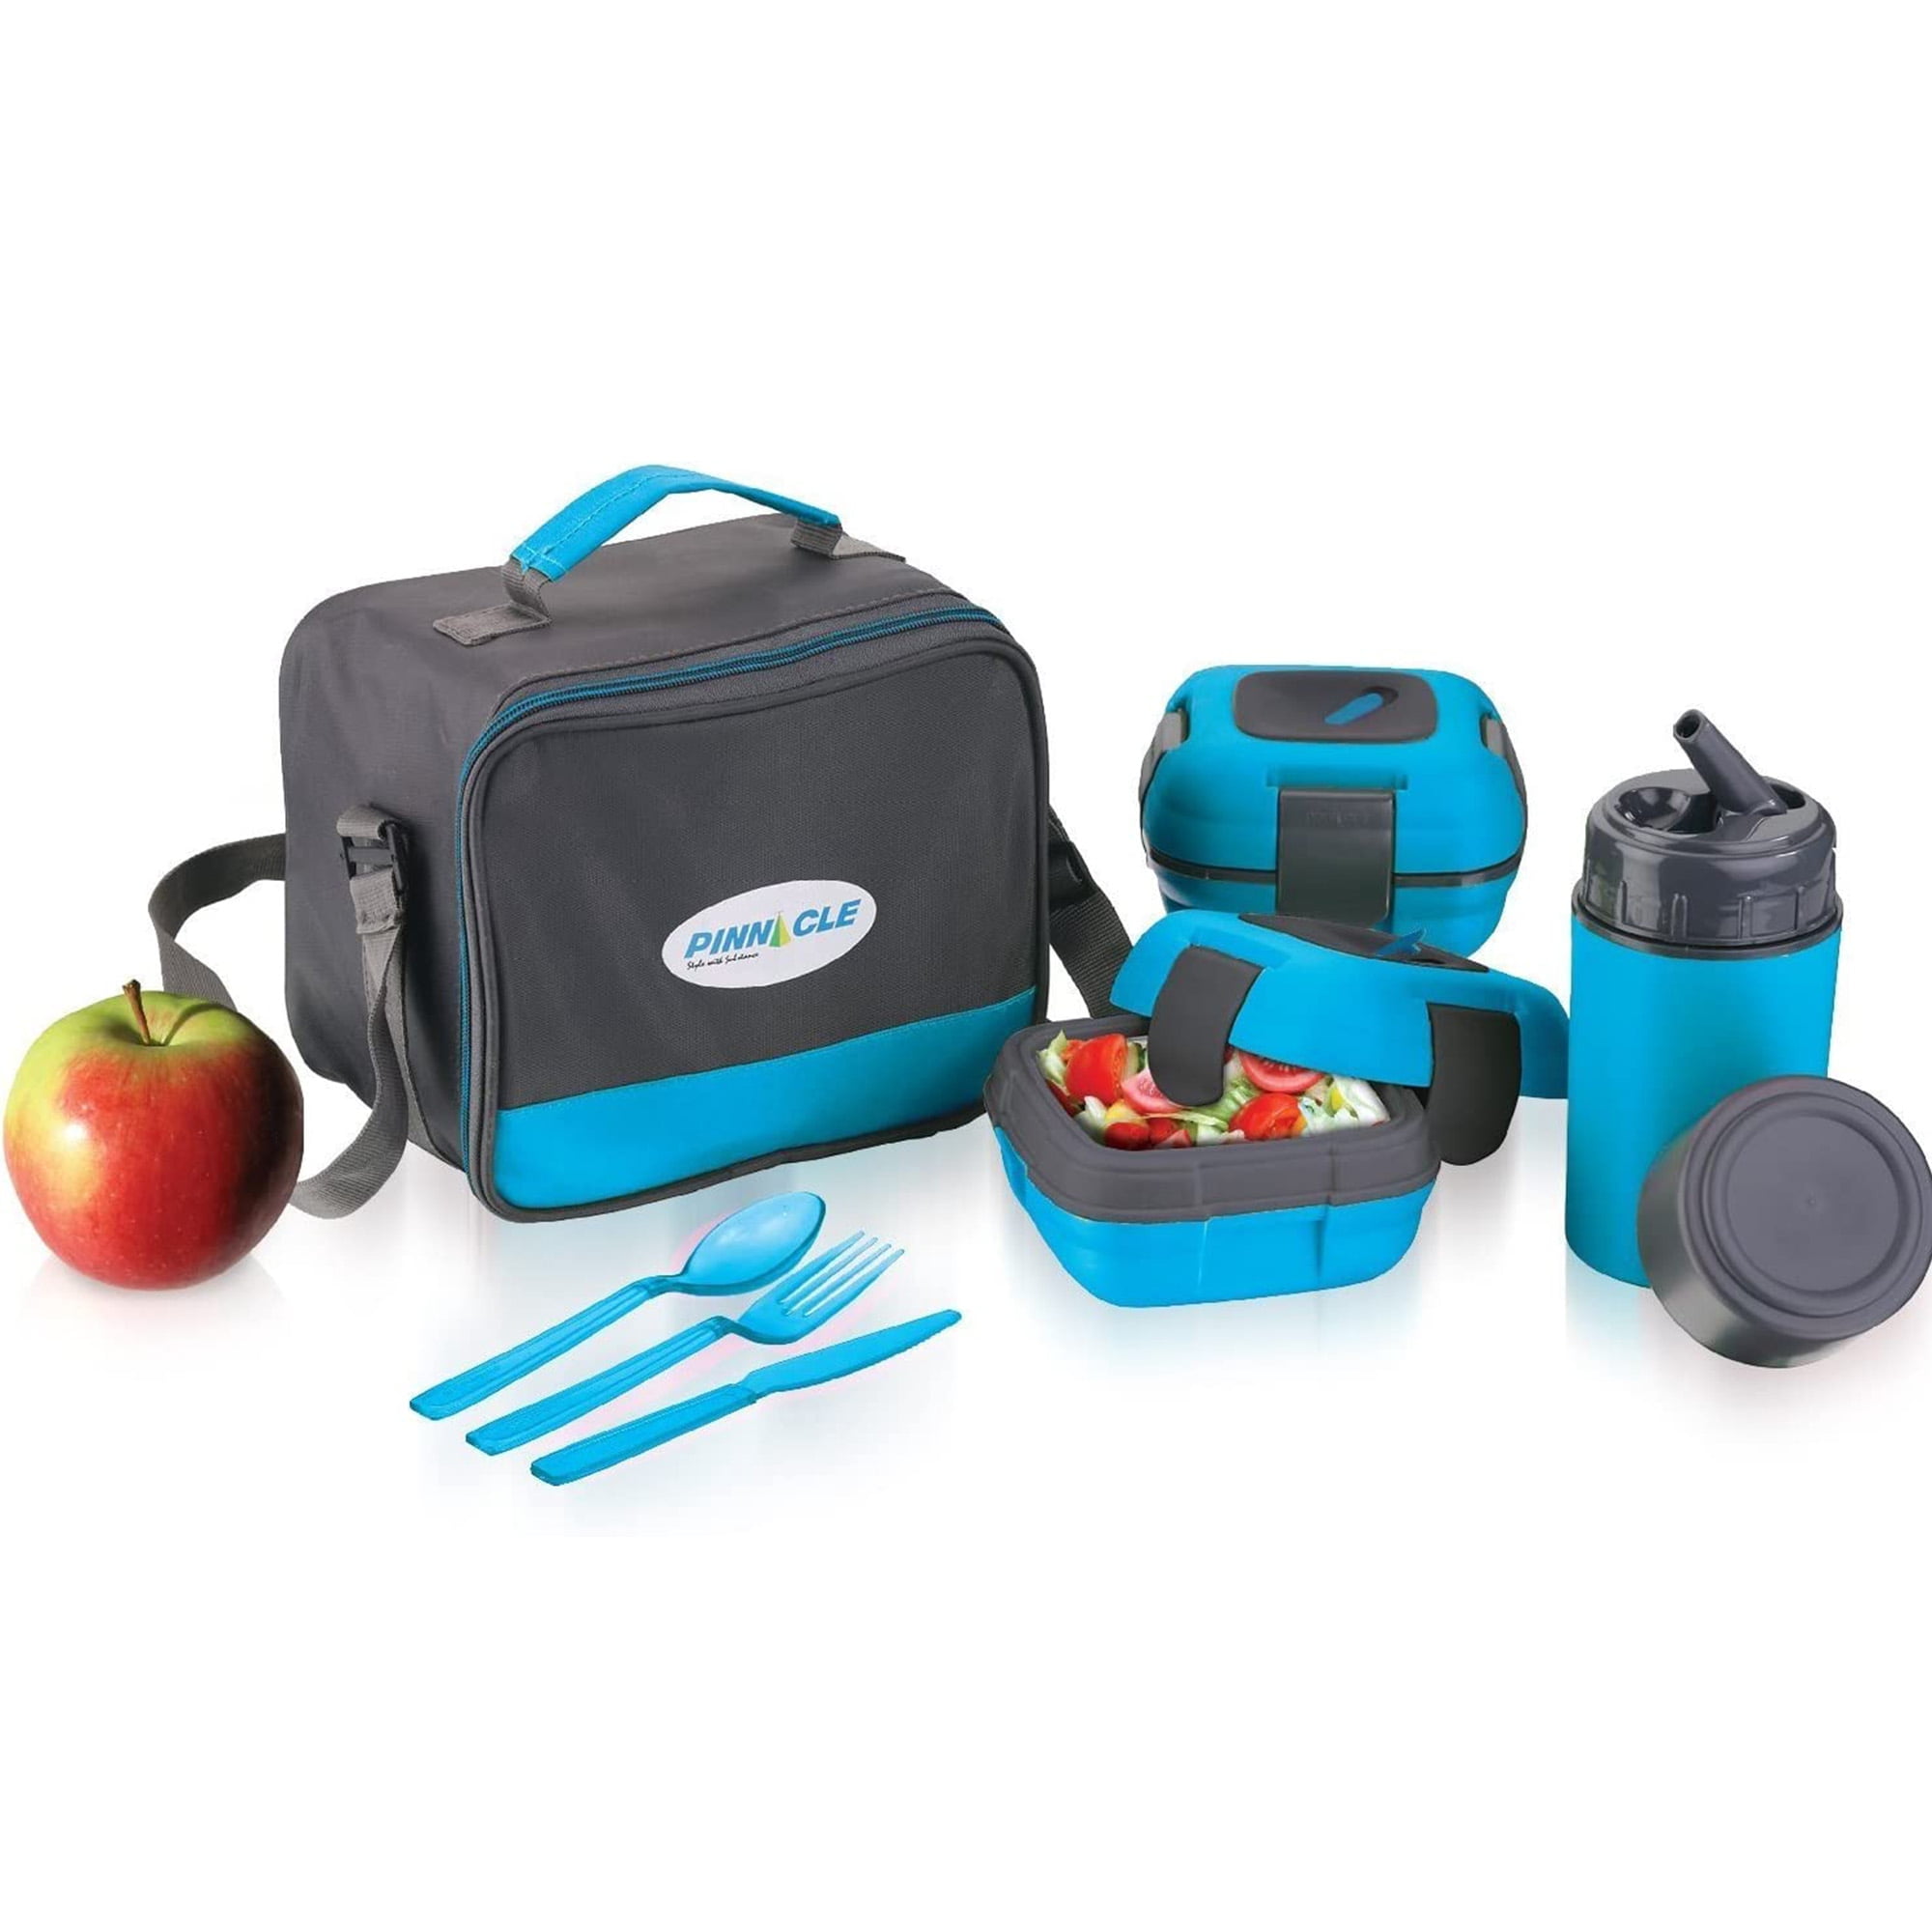 Lunch Box ~ Pinnacle Insulated Leak Proof Lunch Box for Adults and Kids -  Thermal Lunch Container Wi…See more Lunch Box ~ Pinnacle Insulated Leak